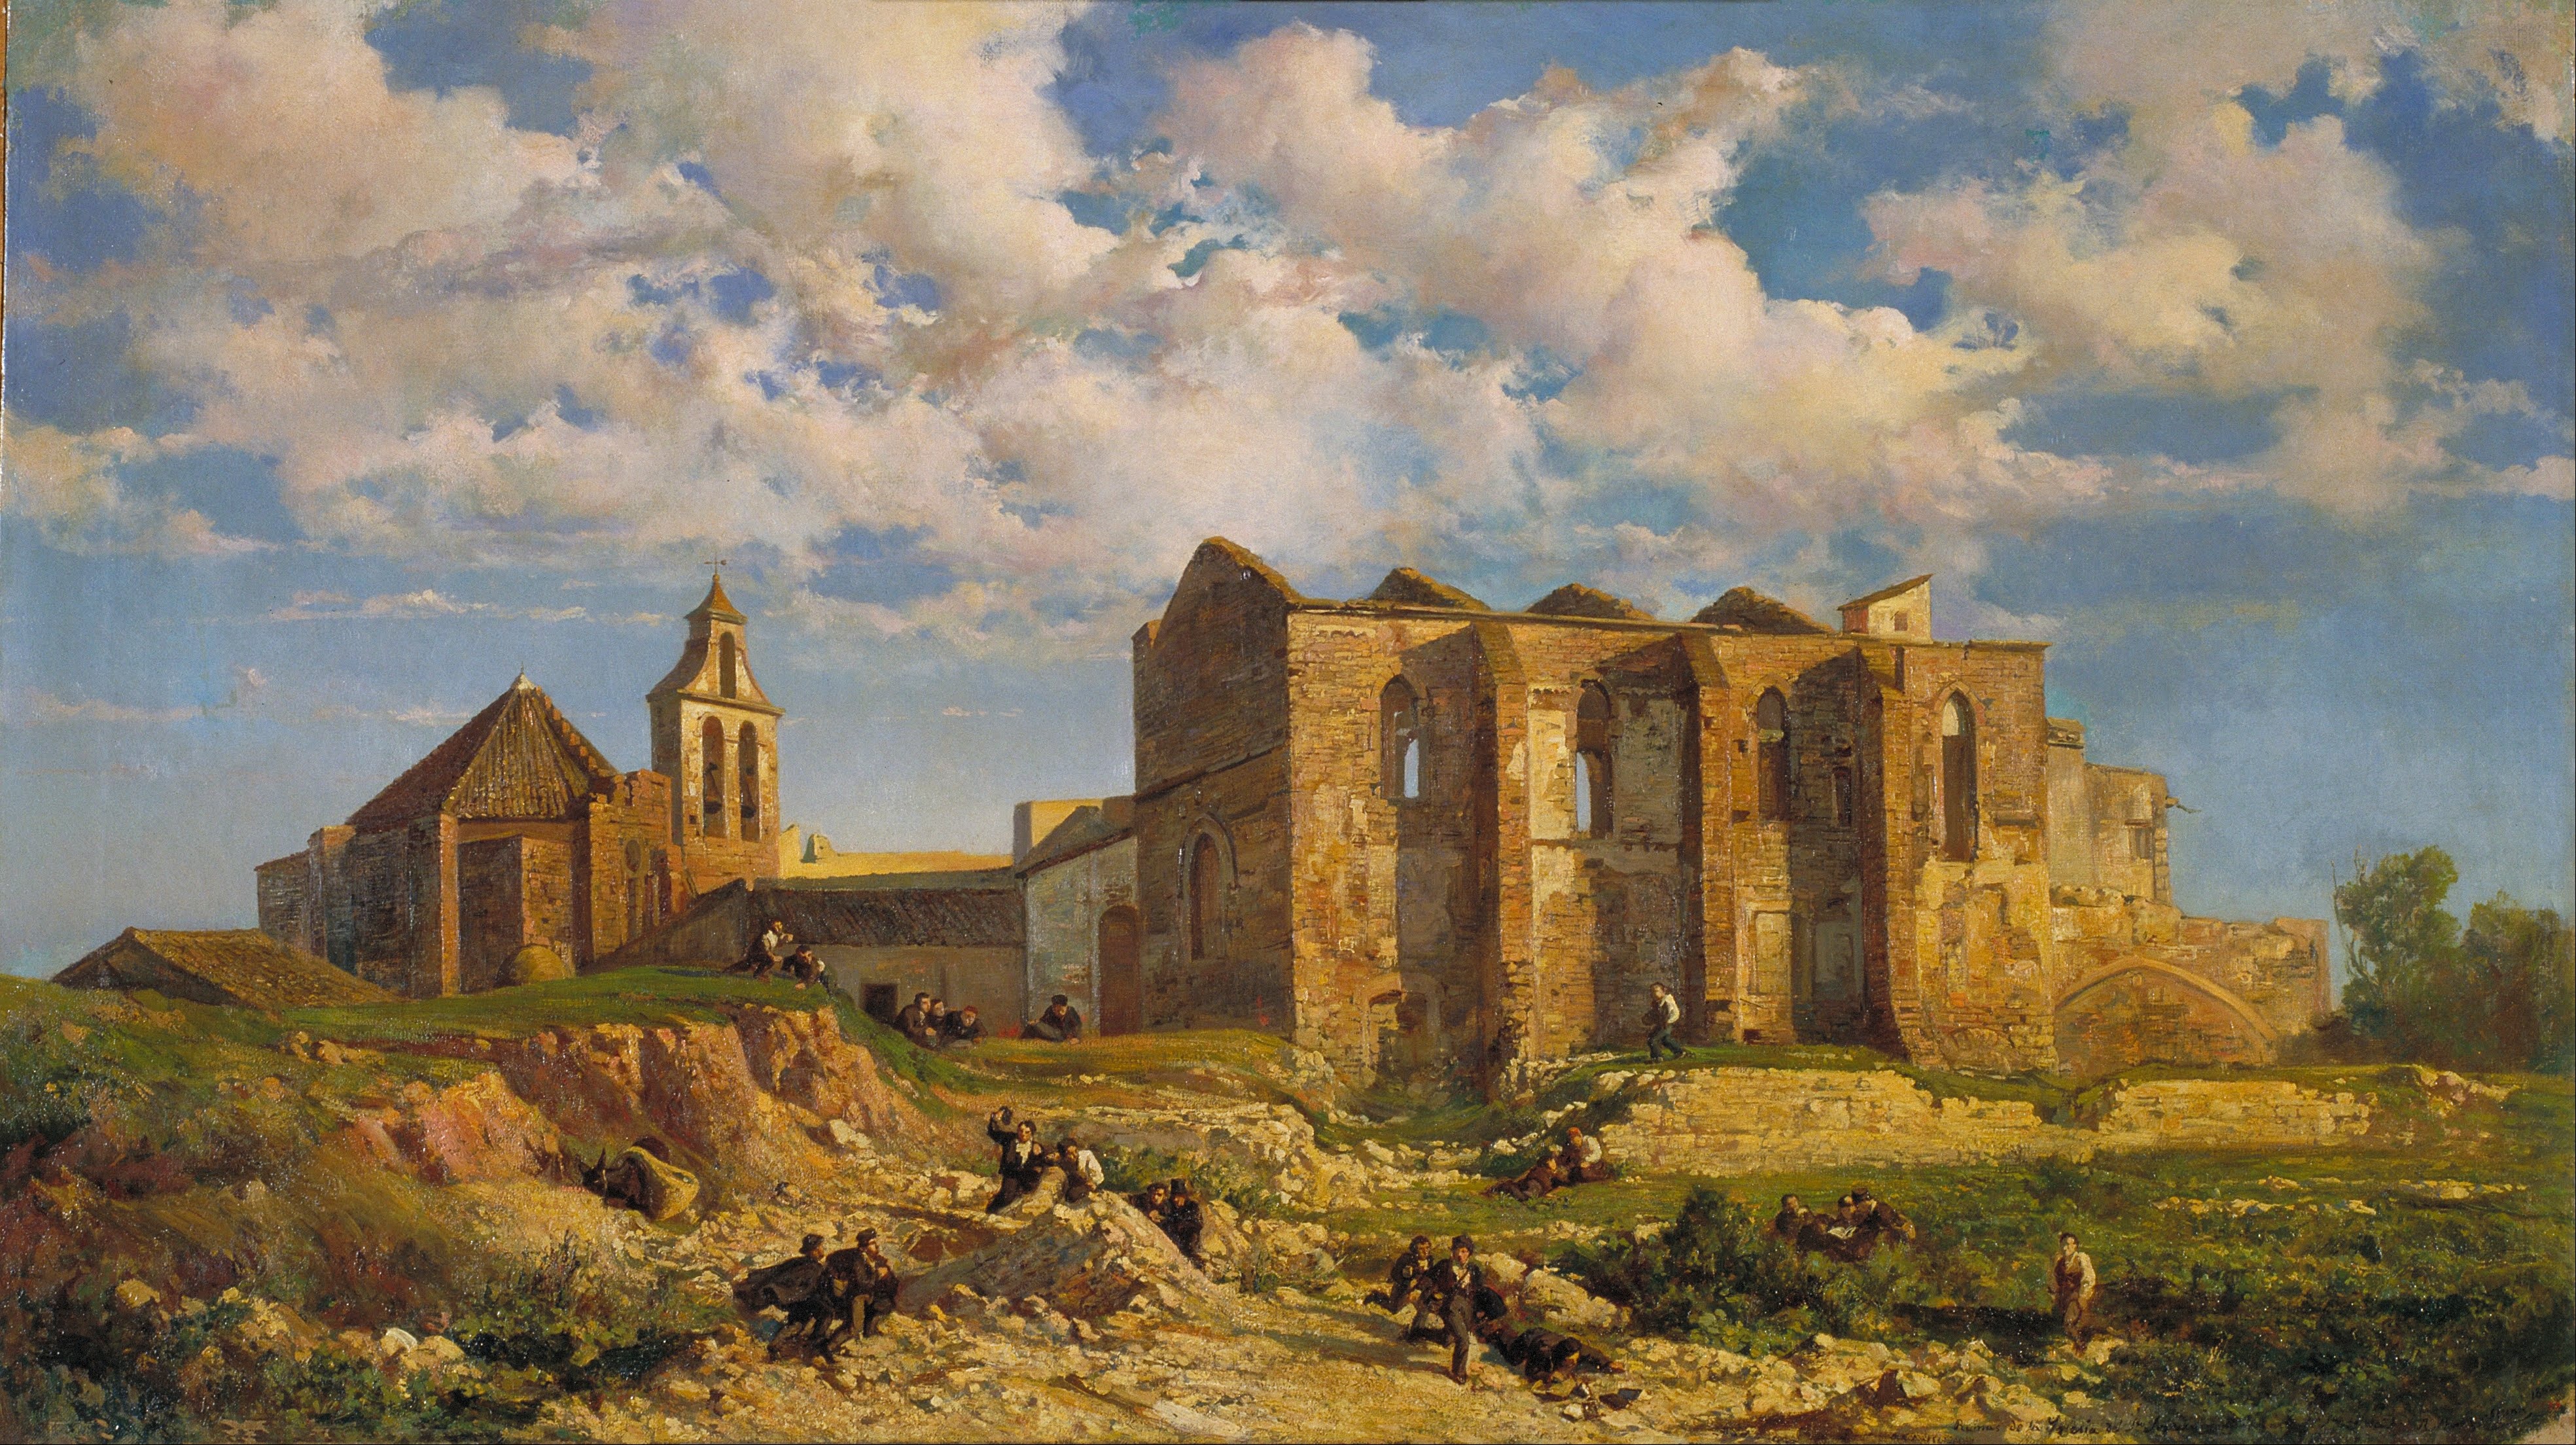 Ramon Martí i Alsina - Ruins of the Church of the Holy Sepulchre - Google Art Project